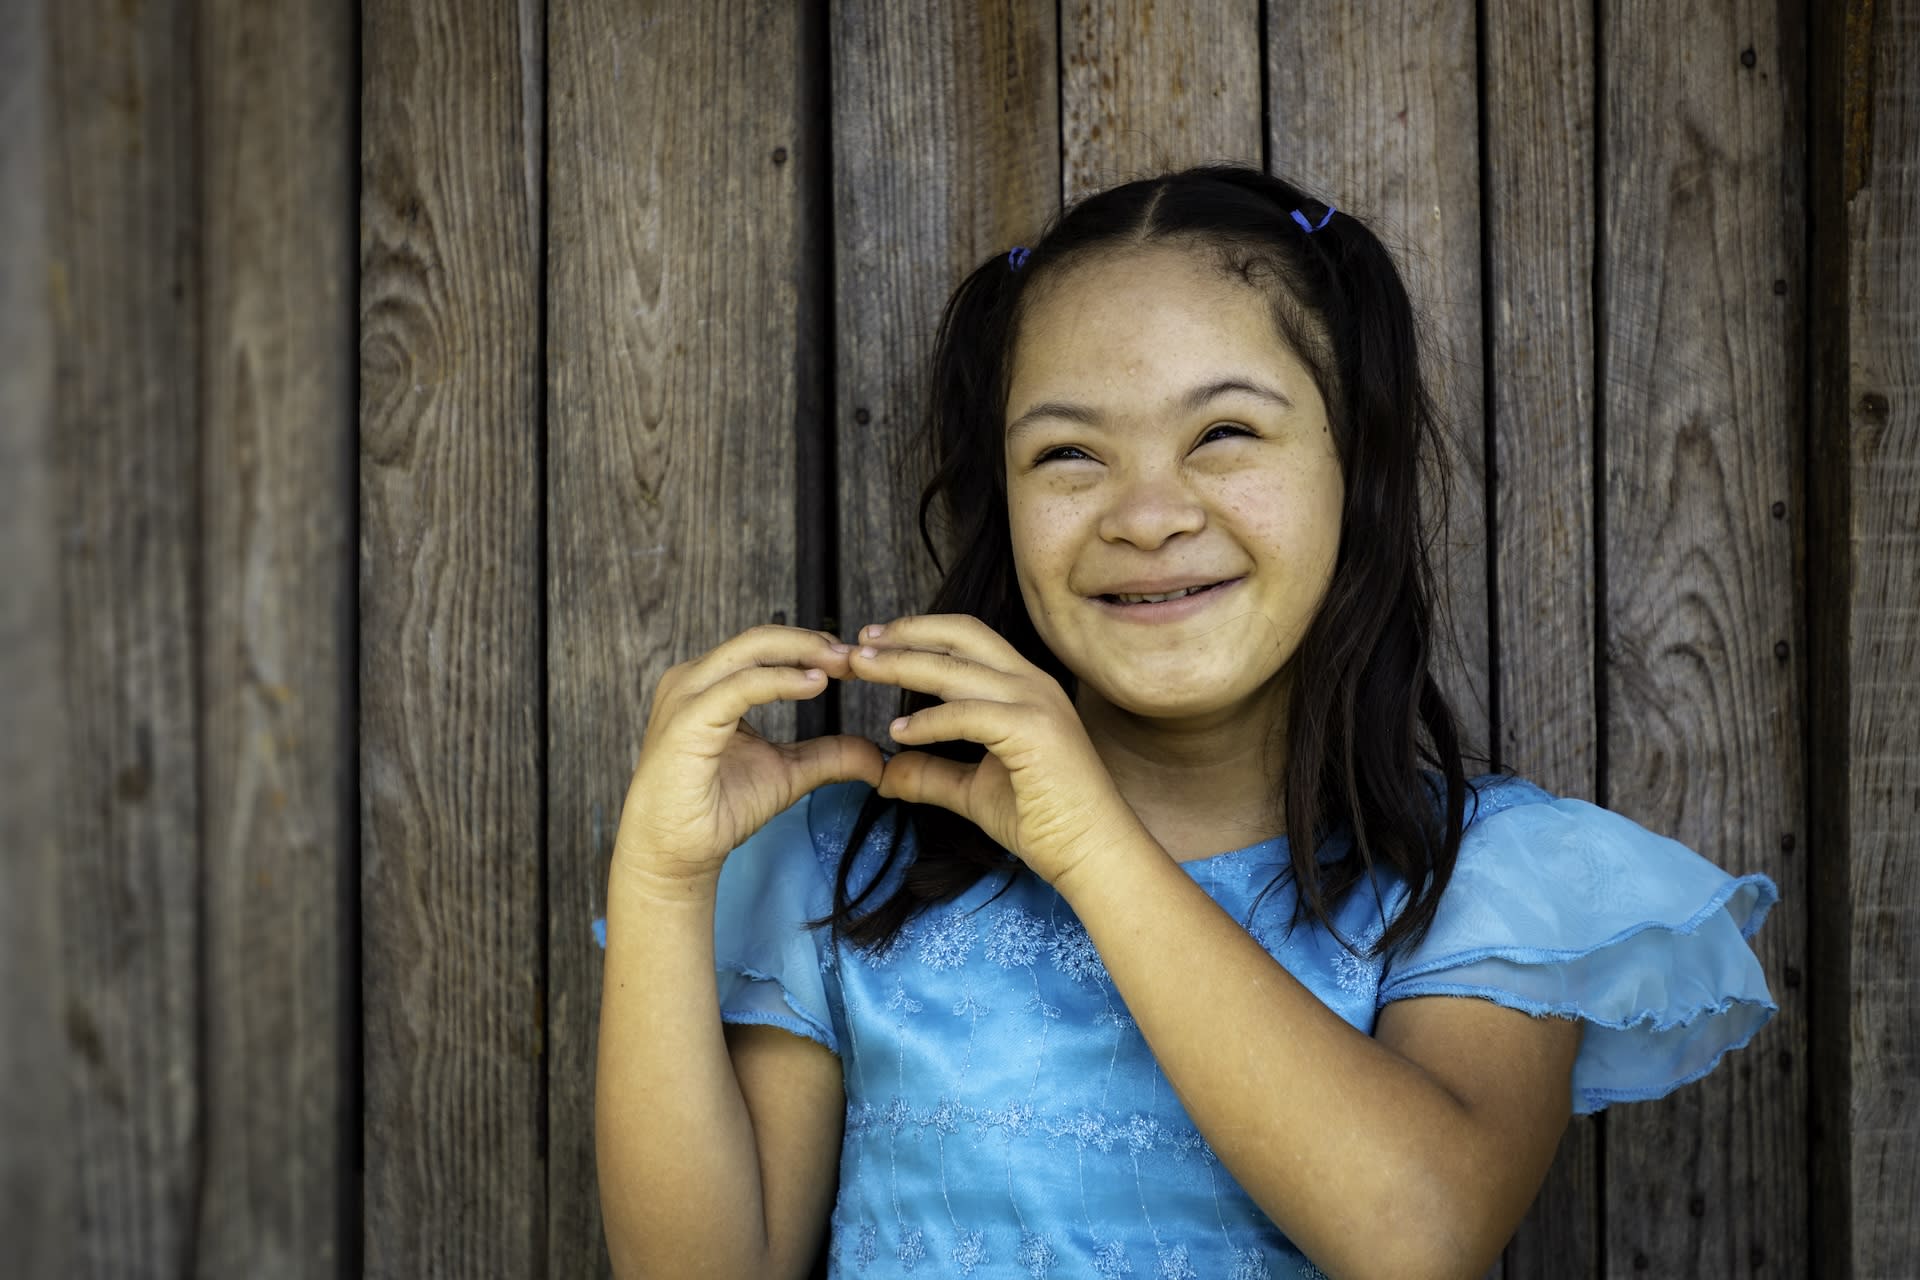 Little girl smiles wearing a blue dress and makes a heart with her hands. There is wood background behind her.